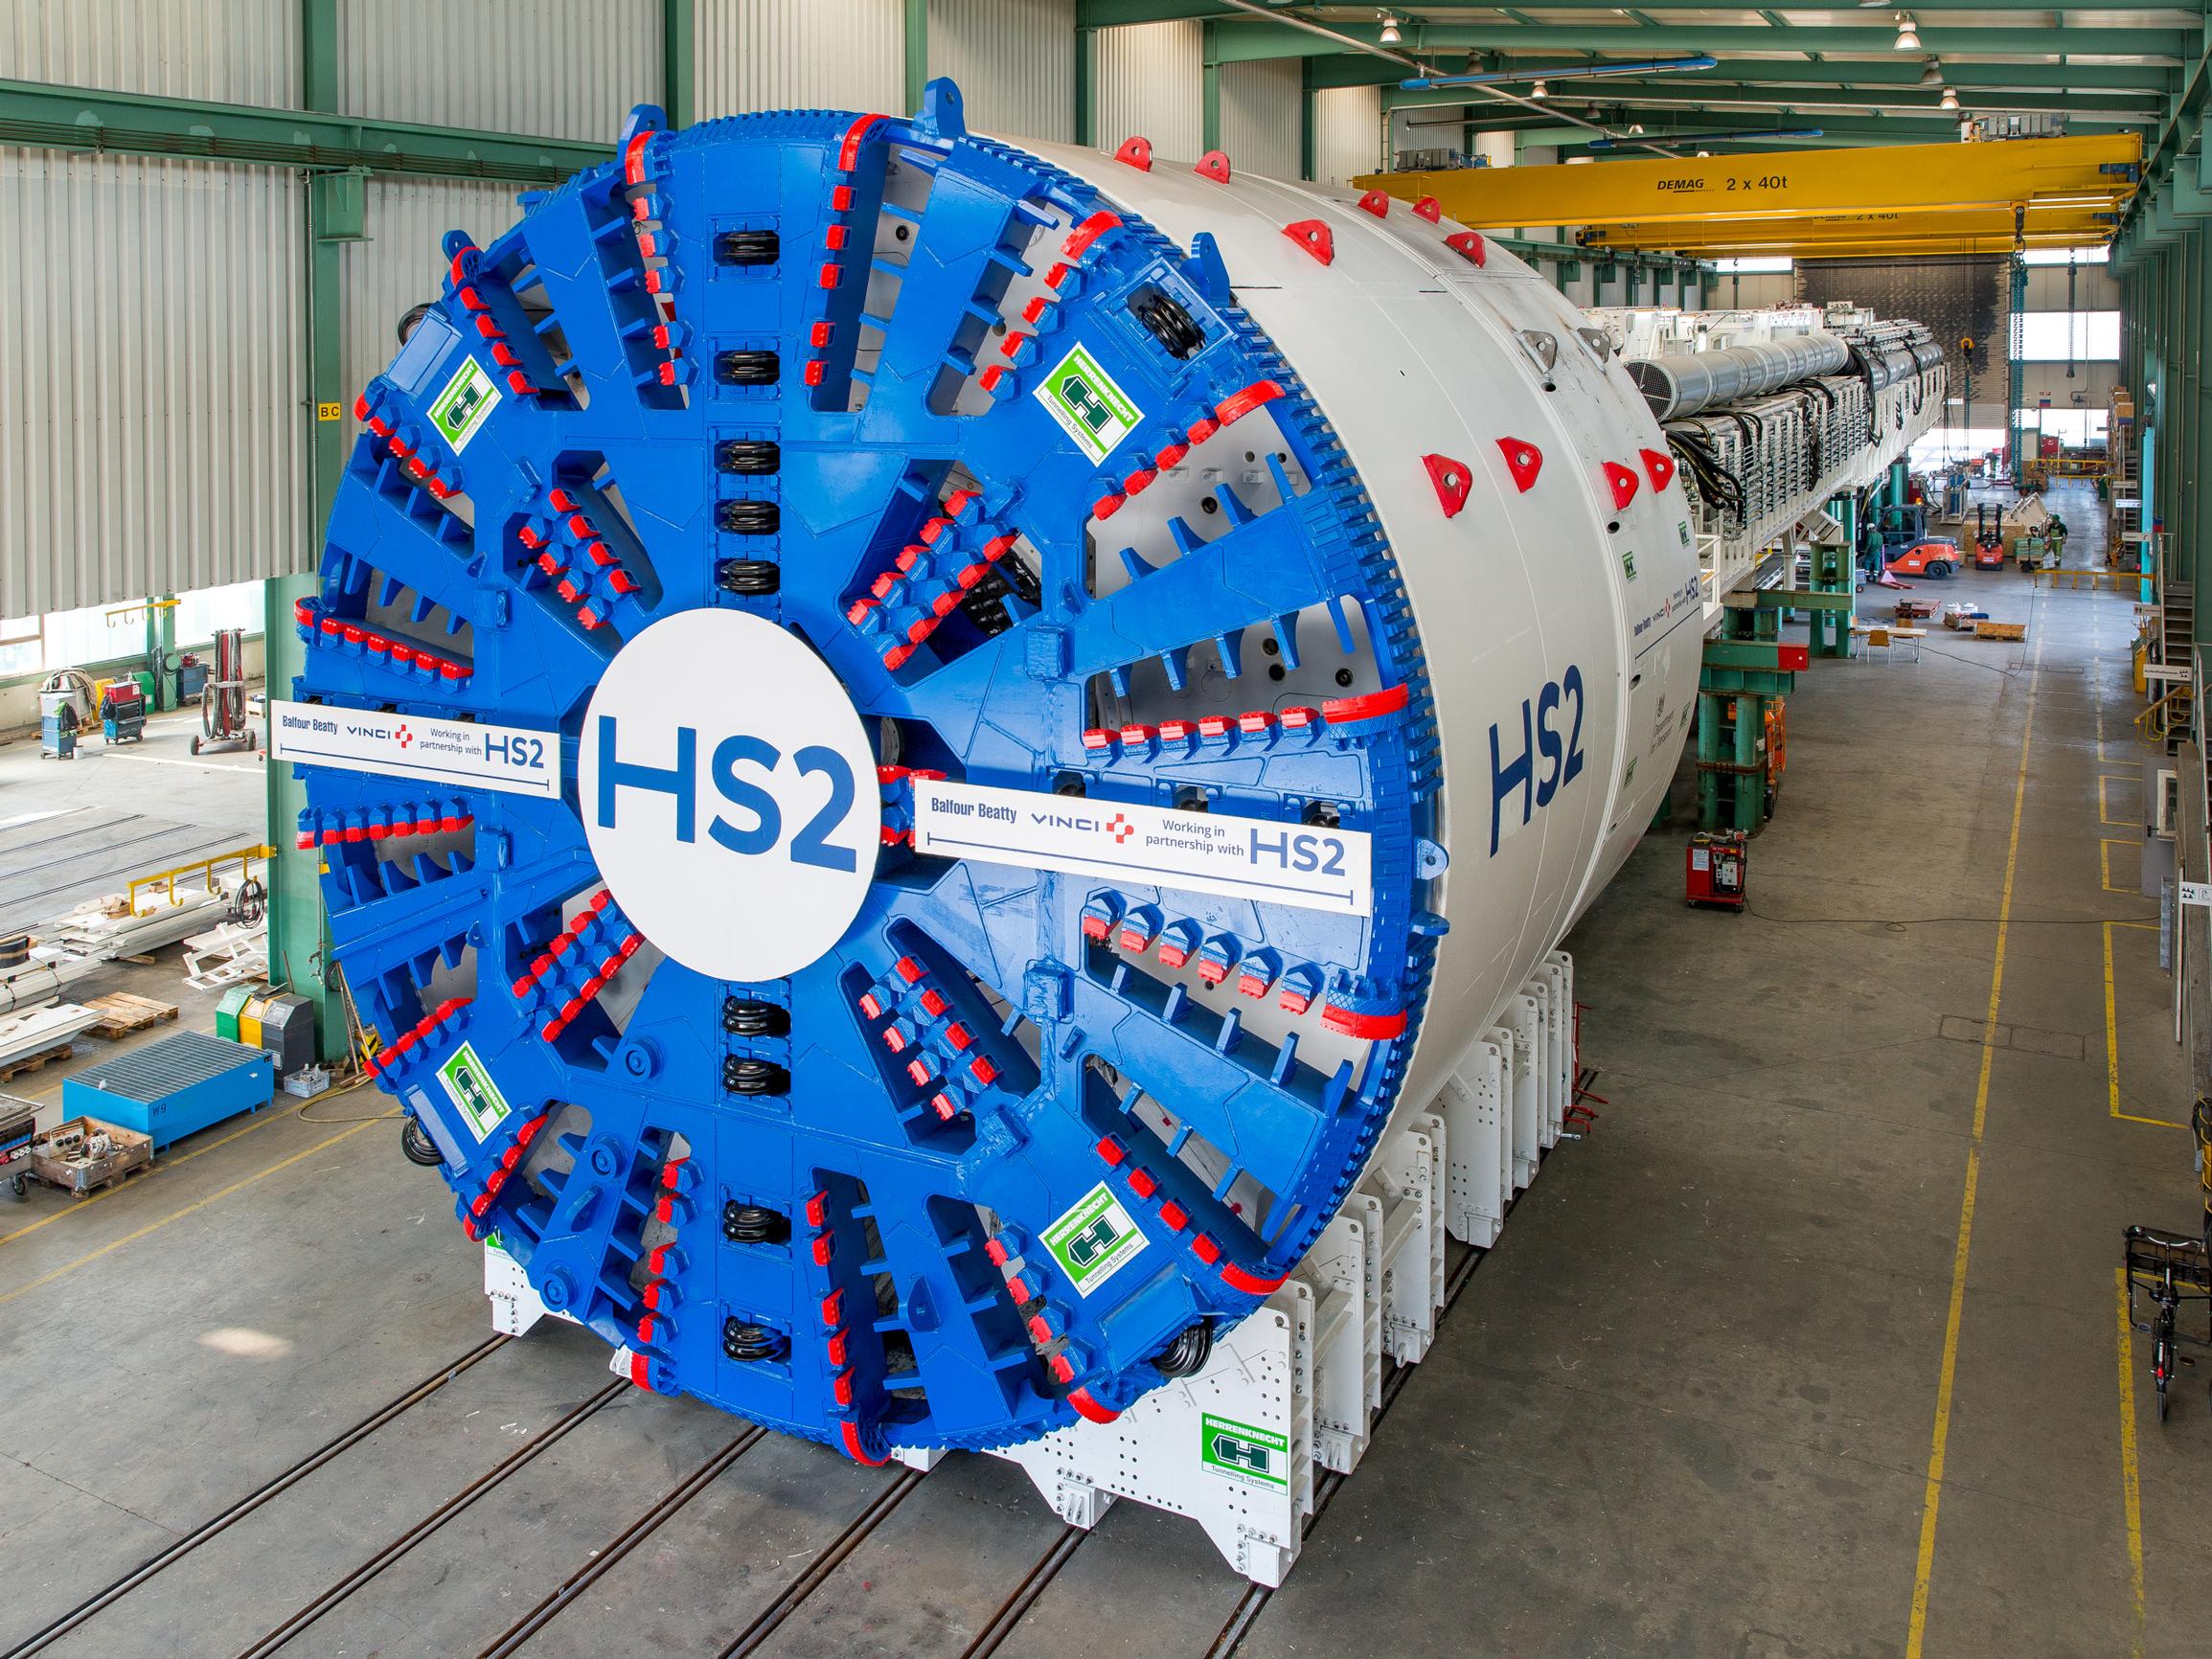 Five giant tunnel boring machines are in operation, with the Chiltern Tunnels over halfway bored, said Mark Harper